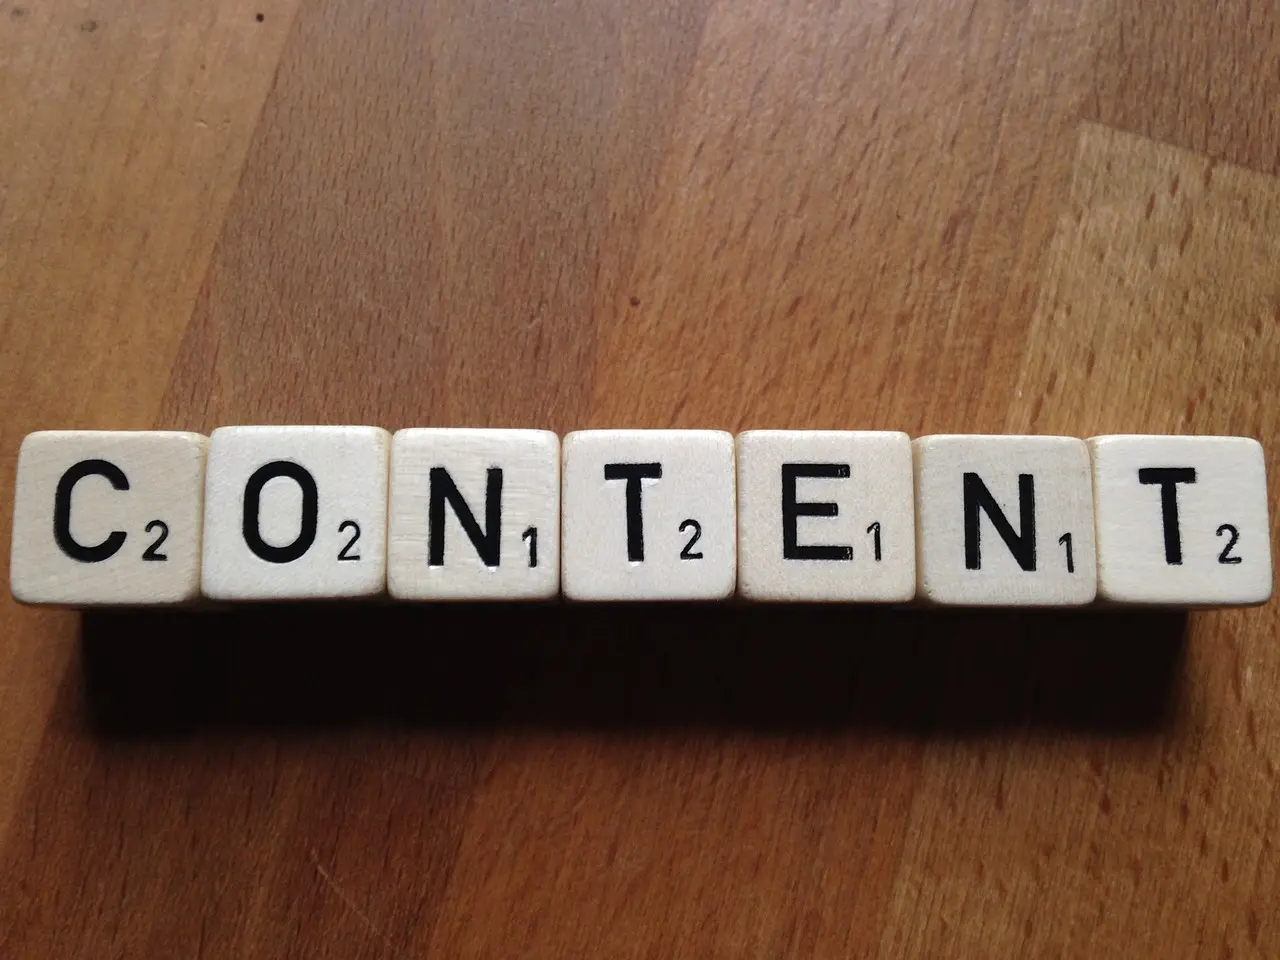 Word "Content" written on dice - word dice game